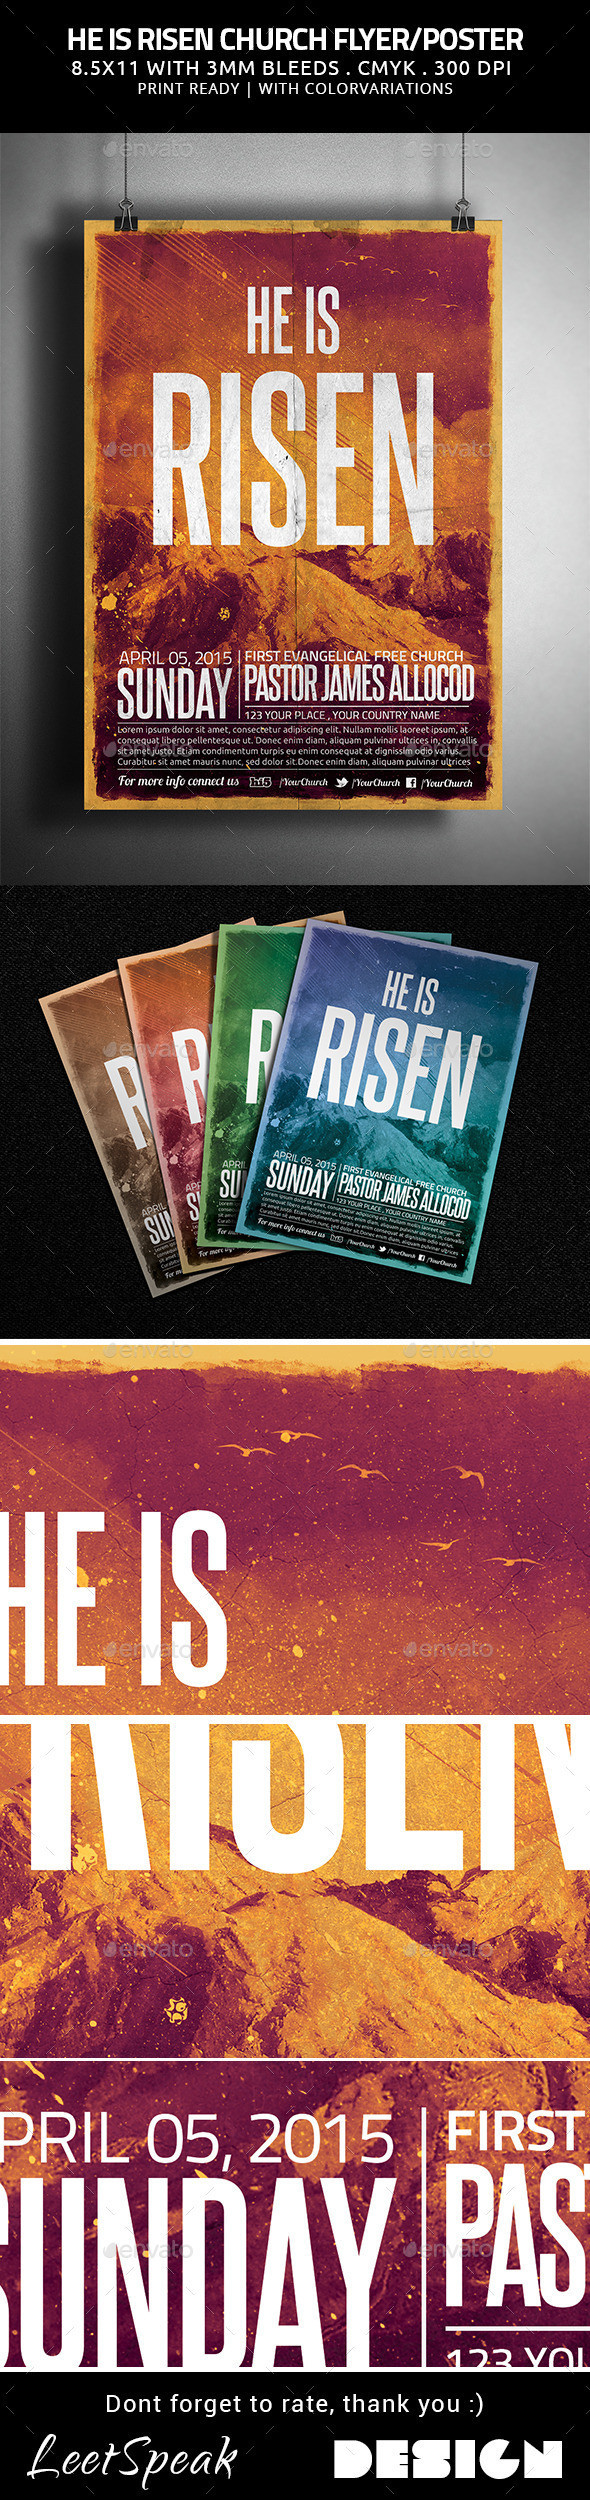 He is risen church flyer poster preview